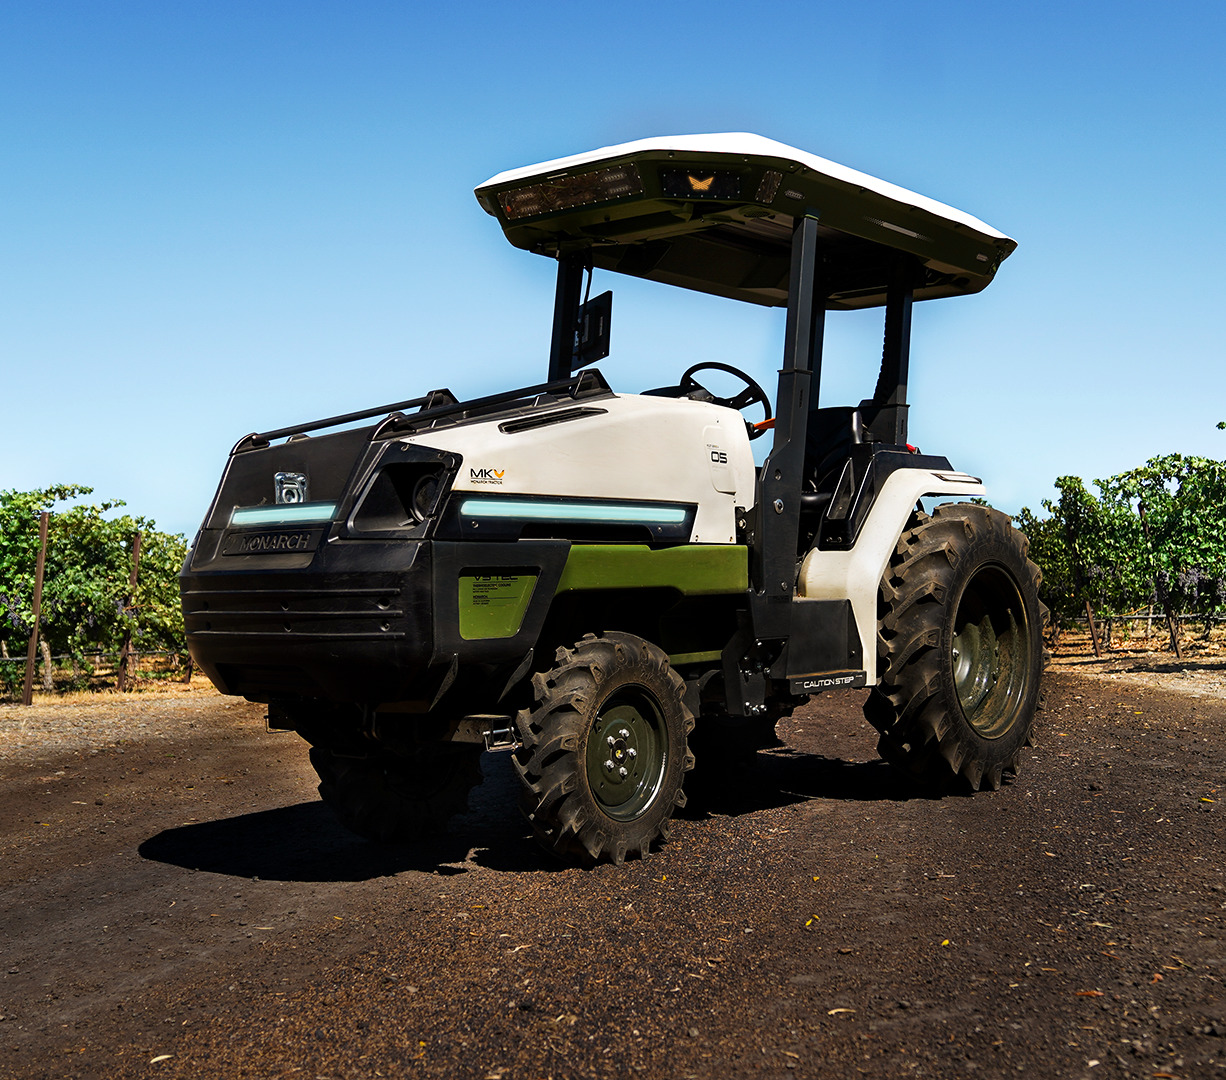 Monarch Tractor is making sustainable farming economically superior with fully electric and autonomous tractors